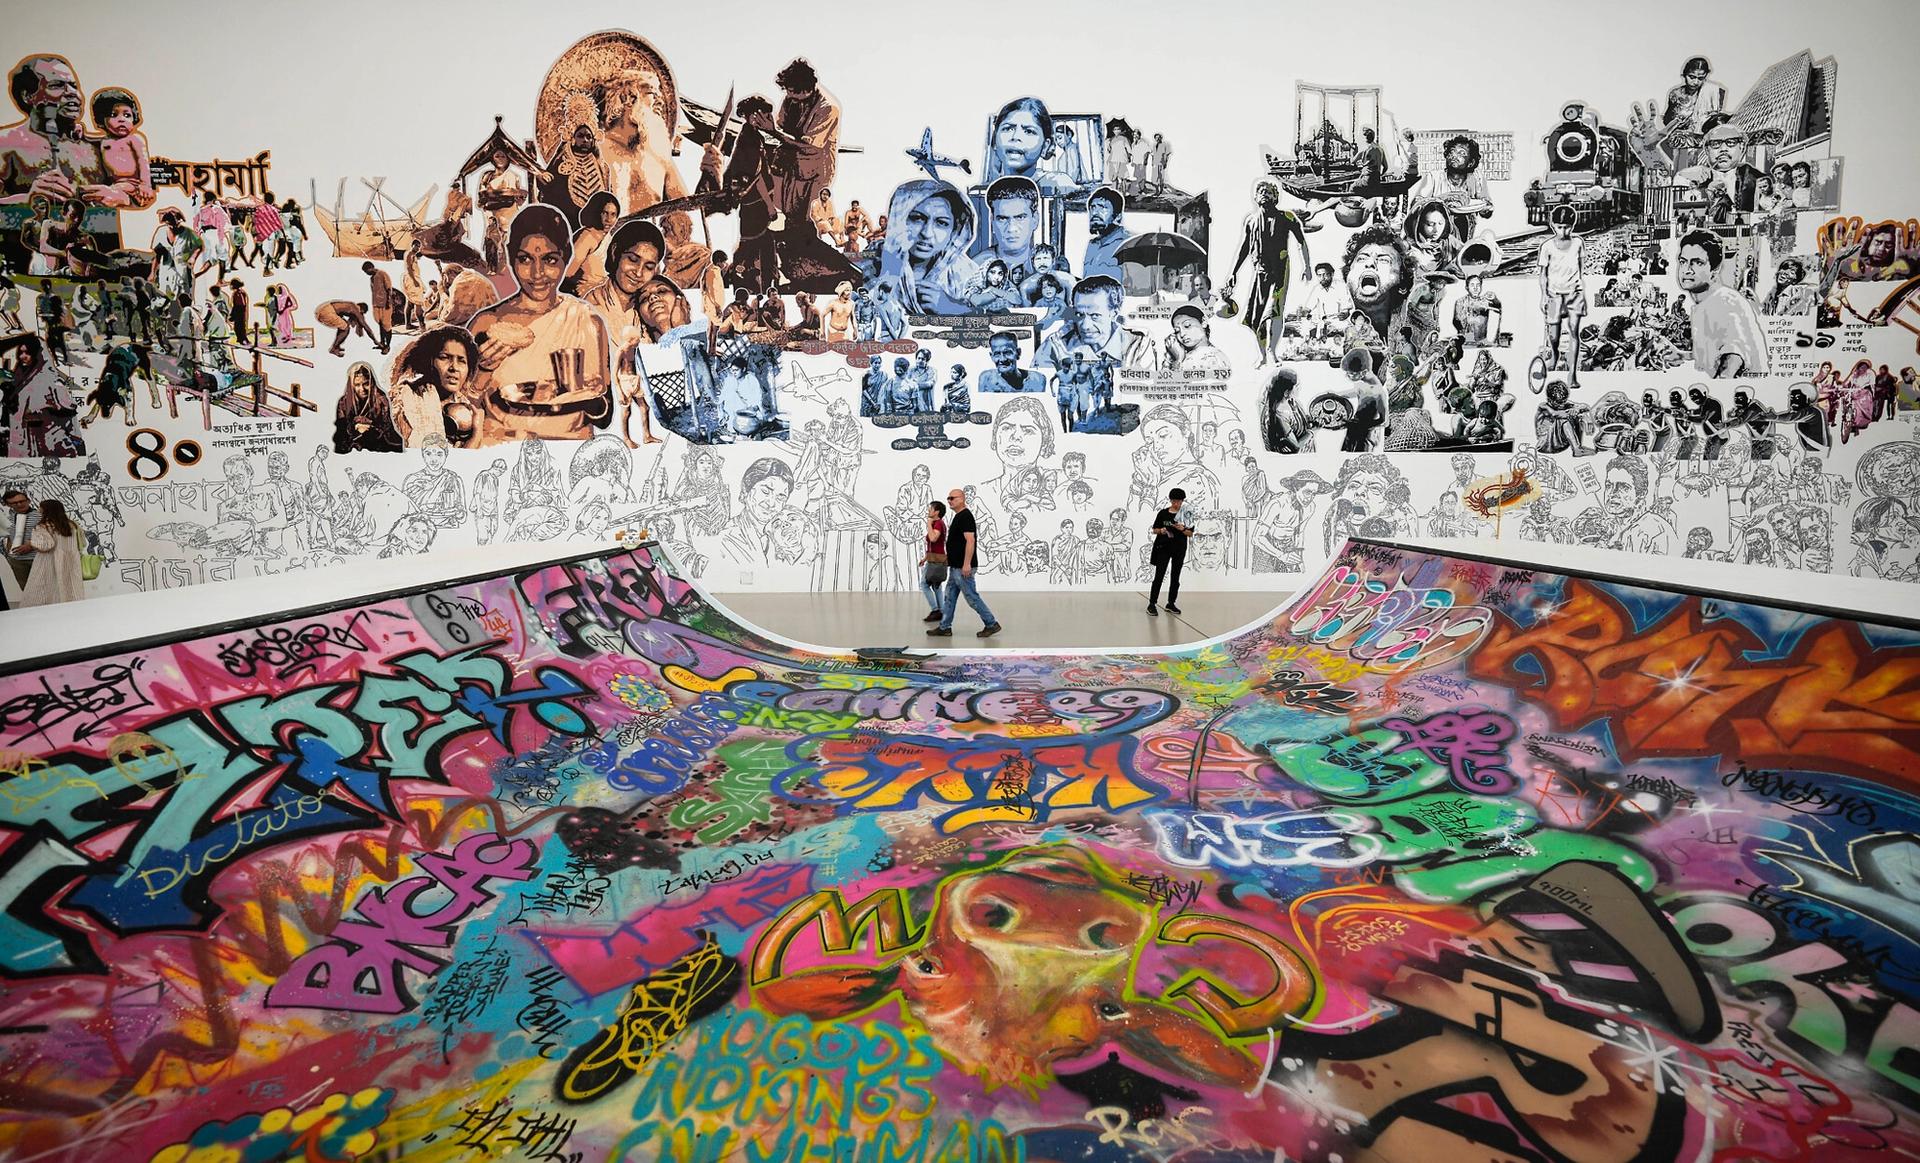 Installations by Britto Arts Trust at Documenta Halle for Documenta 15. Courtesy of Documenta 